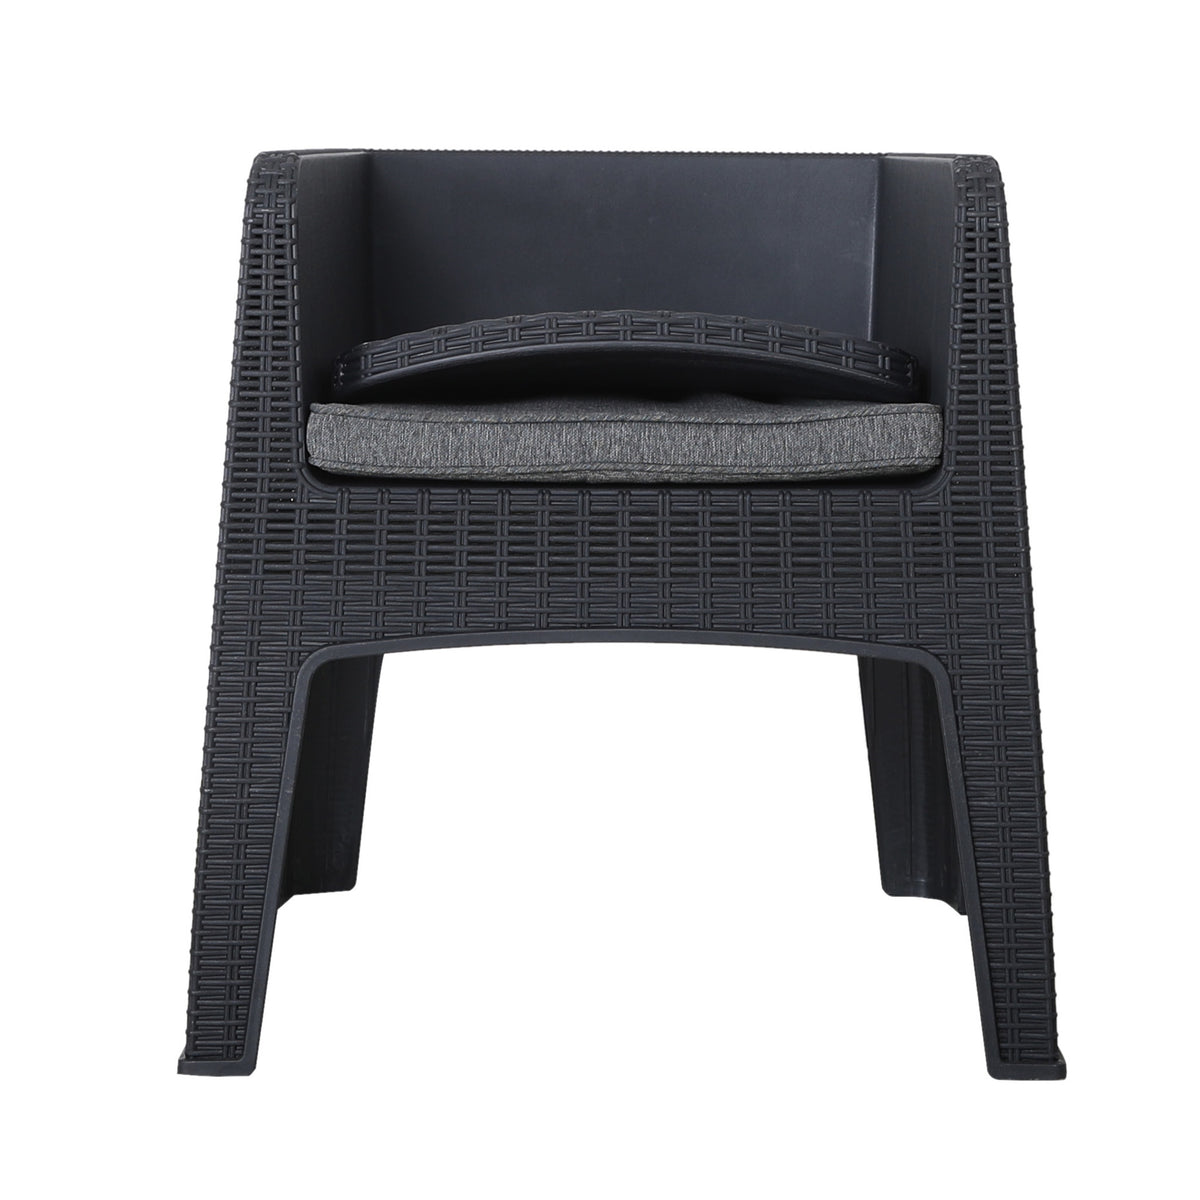 Faro 4 Seat Black Cube Dining Set Chair with folding back